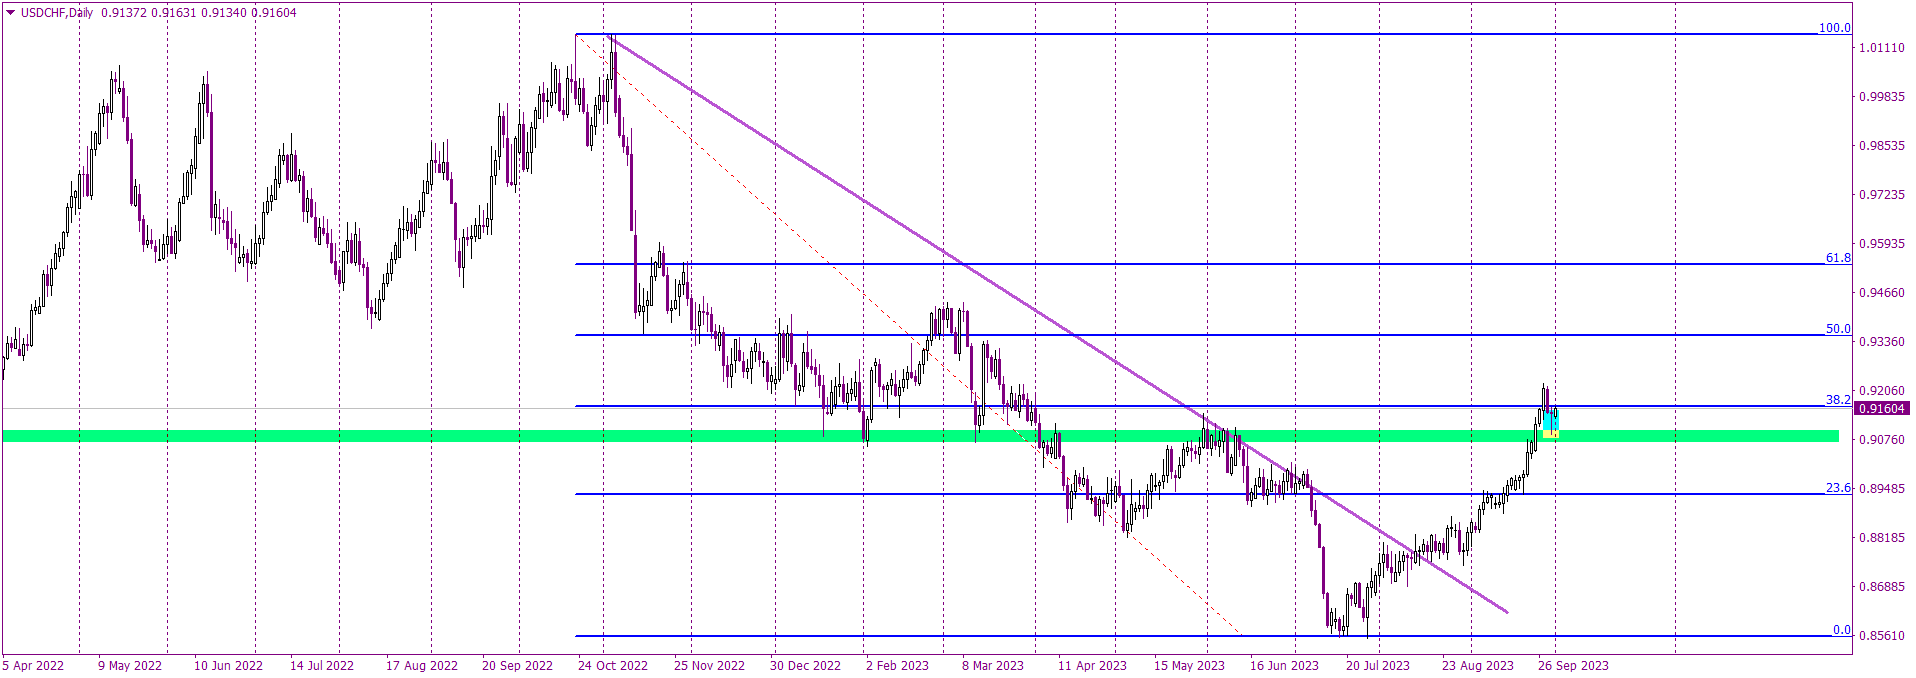 How Will the Double Hammer Impact the USDCHF Pair’s Future?